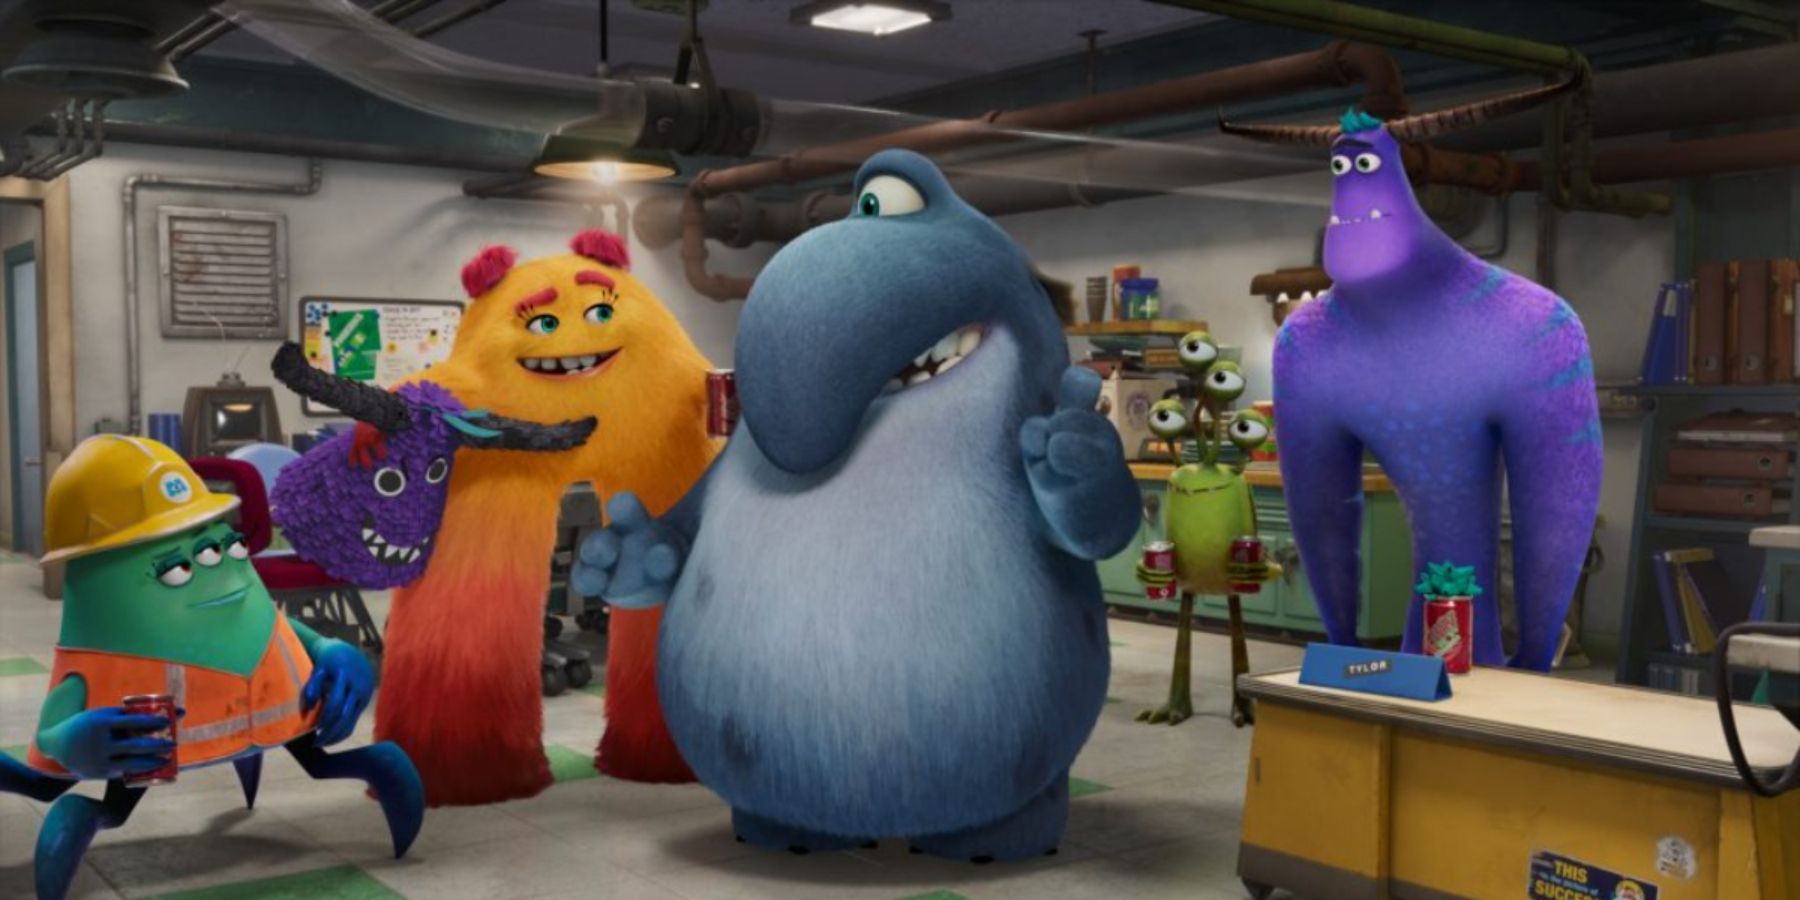 The Cutest Monsters In The 'Monsters, Inc.' Franchise, Ranked